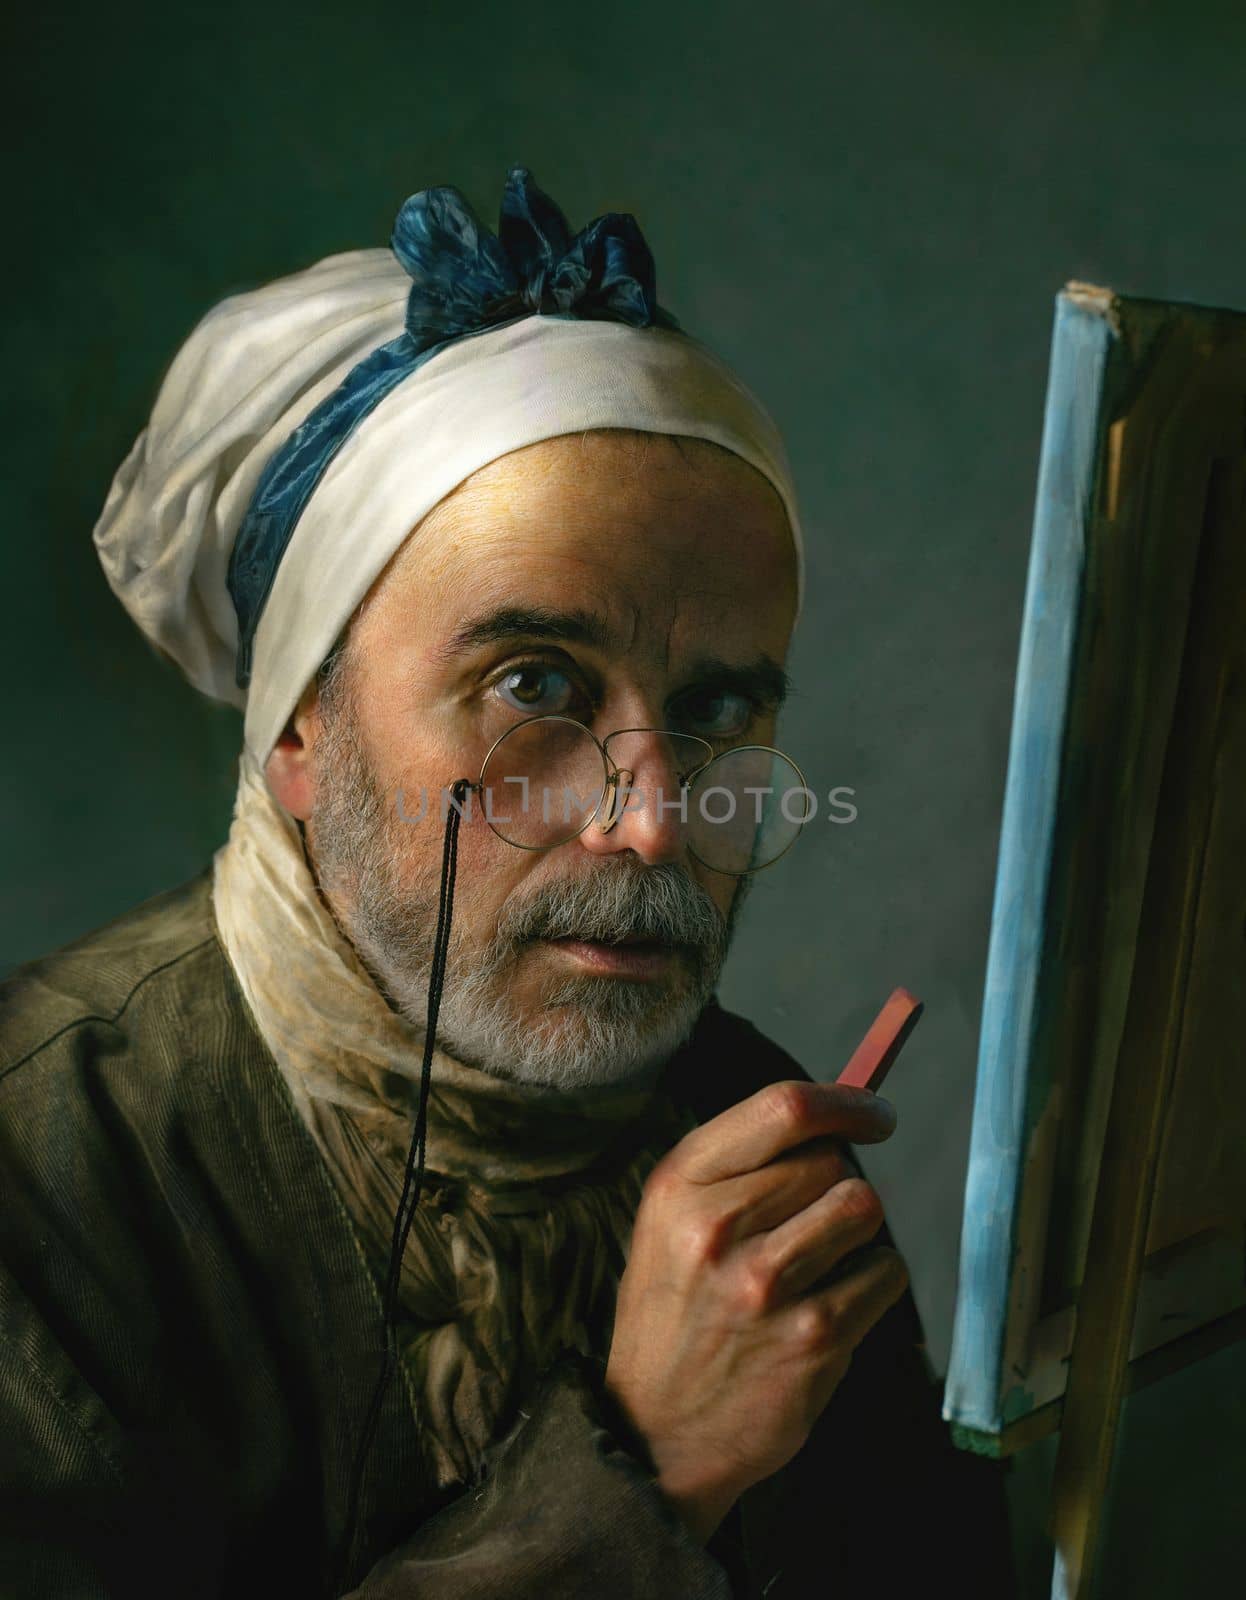 a photo portrait of a 21st century is a homage to a self-portrait by Jacques Baptiste Chardin of a 18st century High quality photo